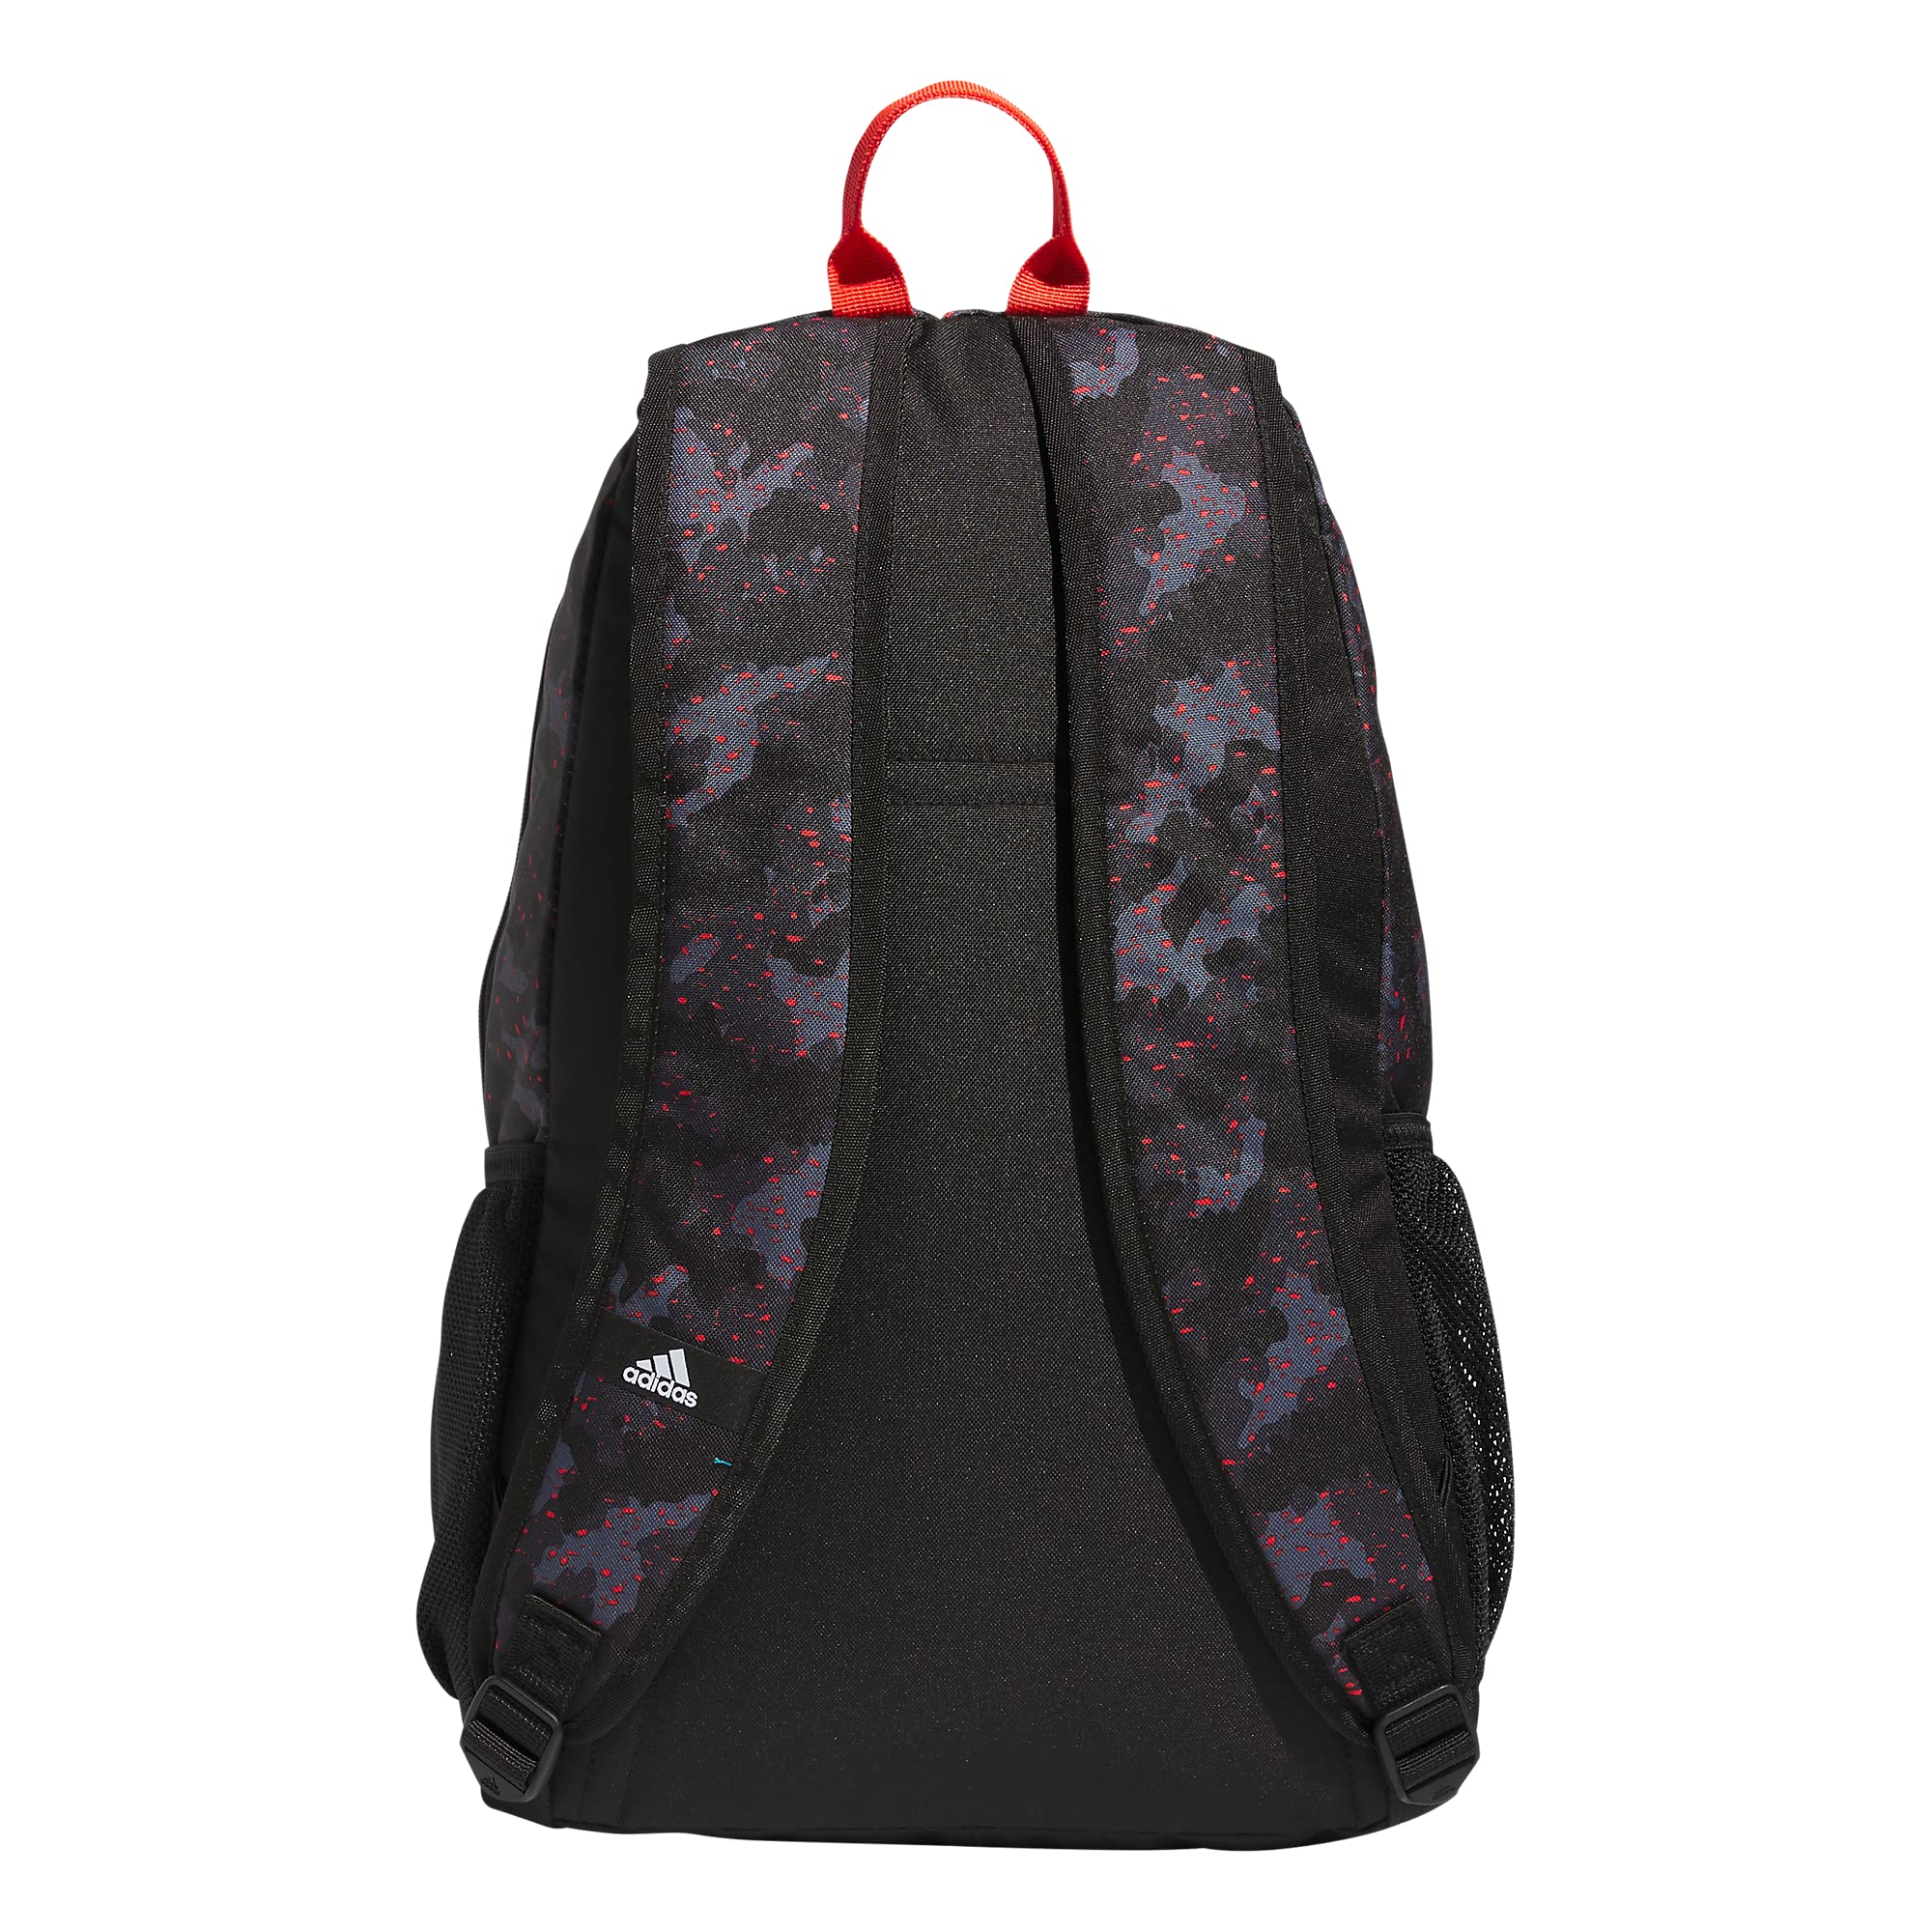 adidas Foundation 6 Backpack, Galaxy Camo Black-Bright Red/Black/Bright Red, One Size